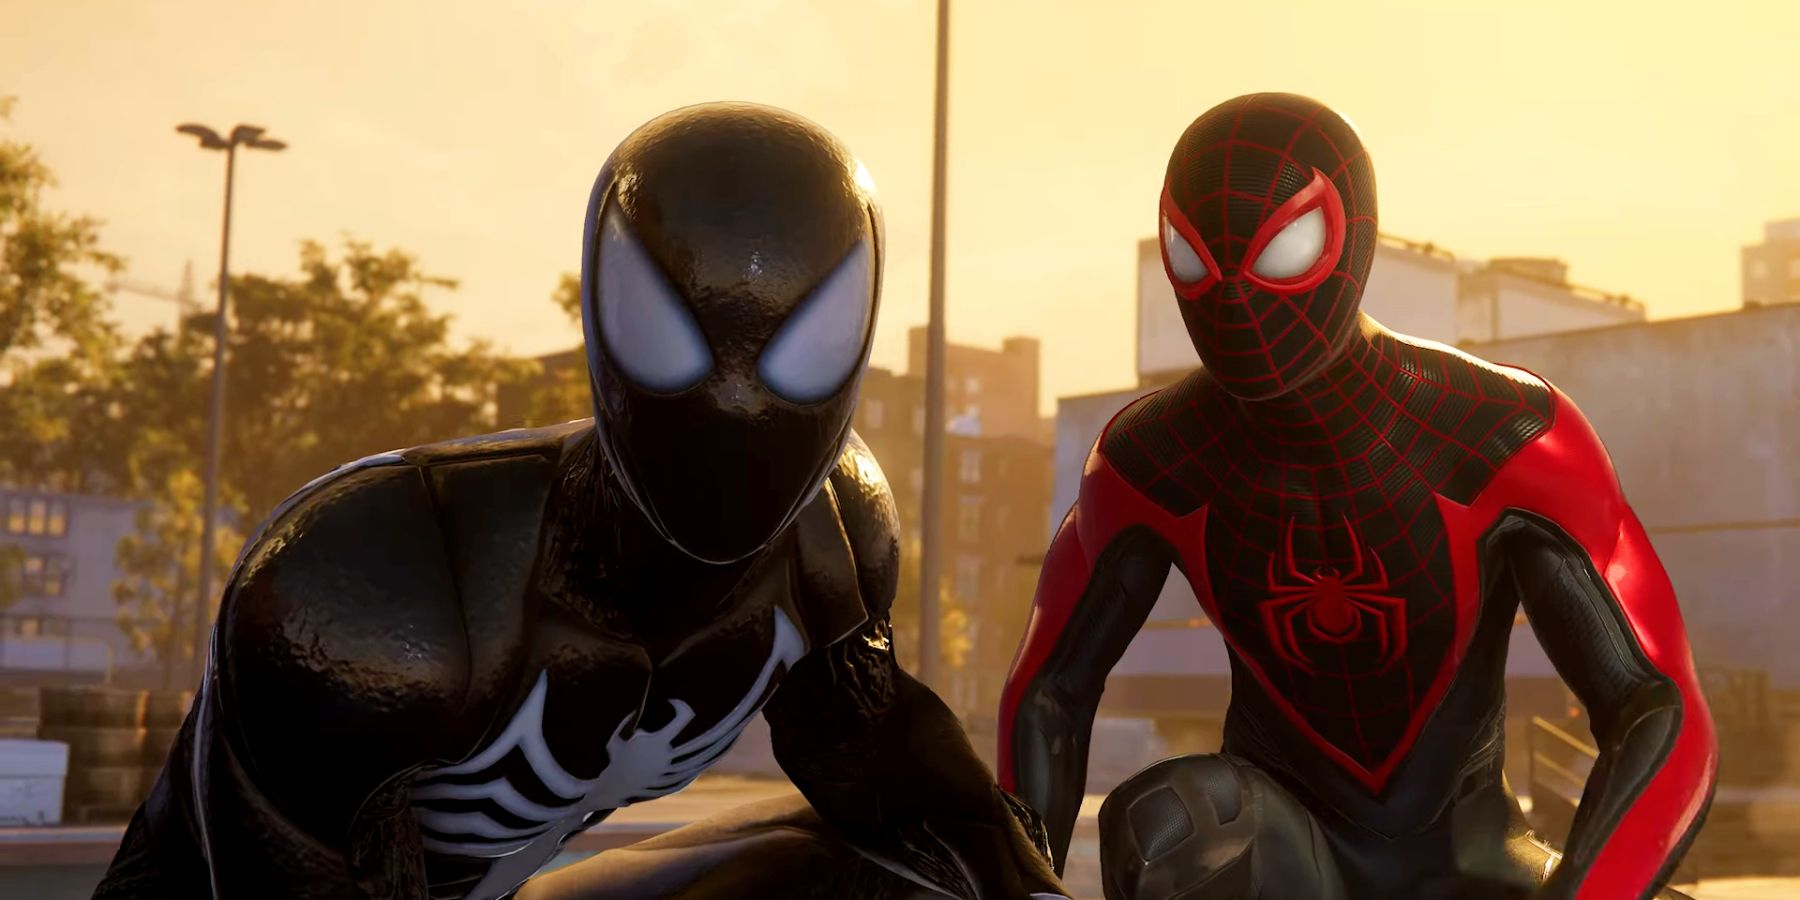 Peter Parker and Miles Morales side-by-side, with the former in a suit of the Venom symbiote. Behind them are industrial buildings and an orange sky.